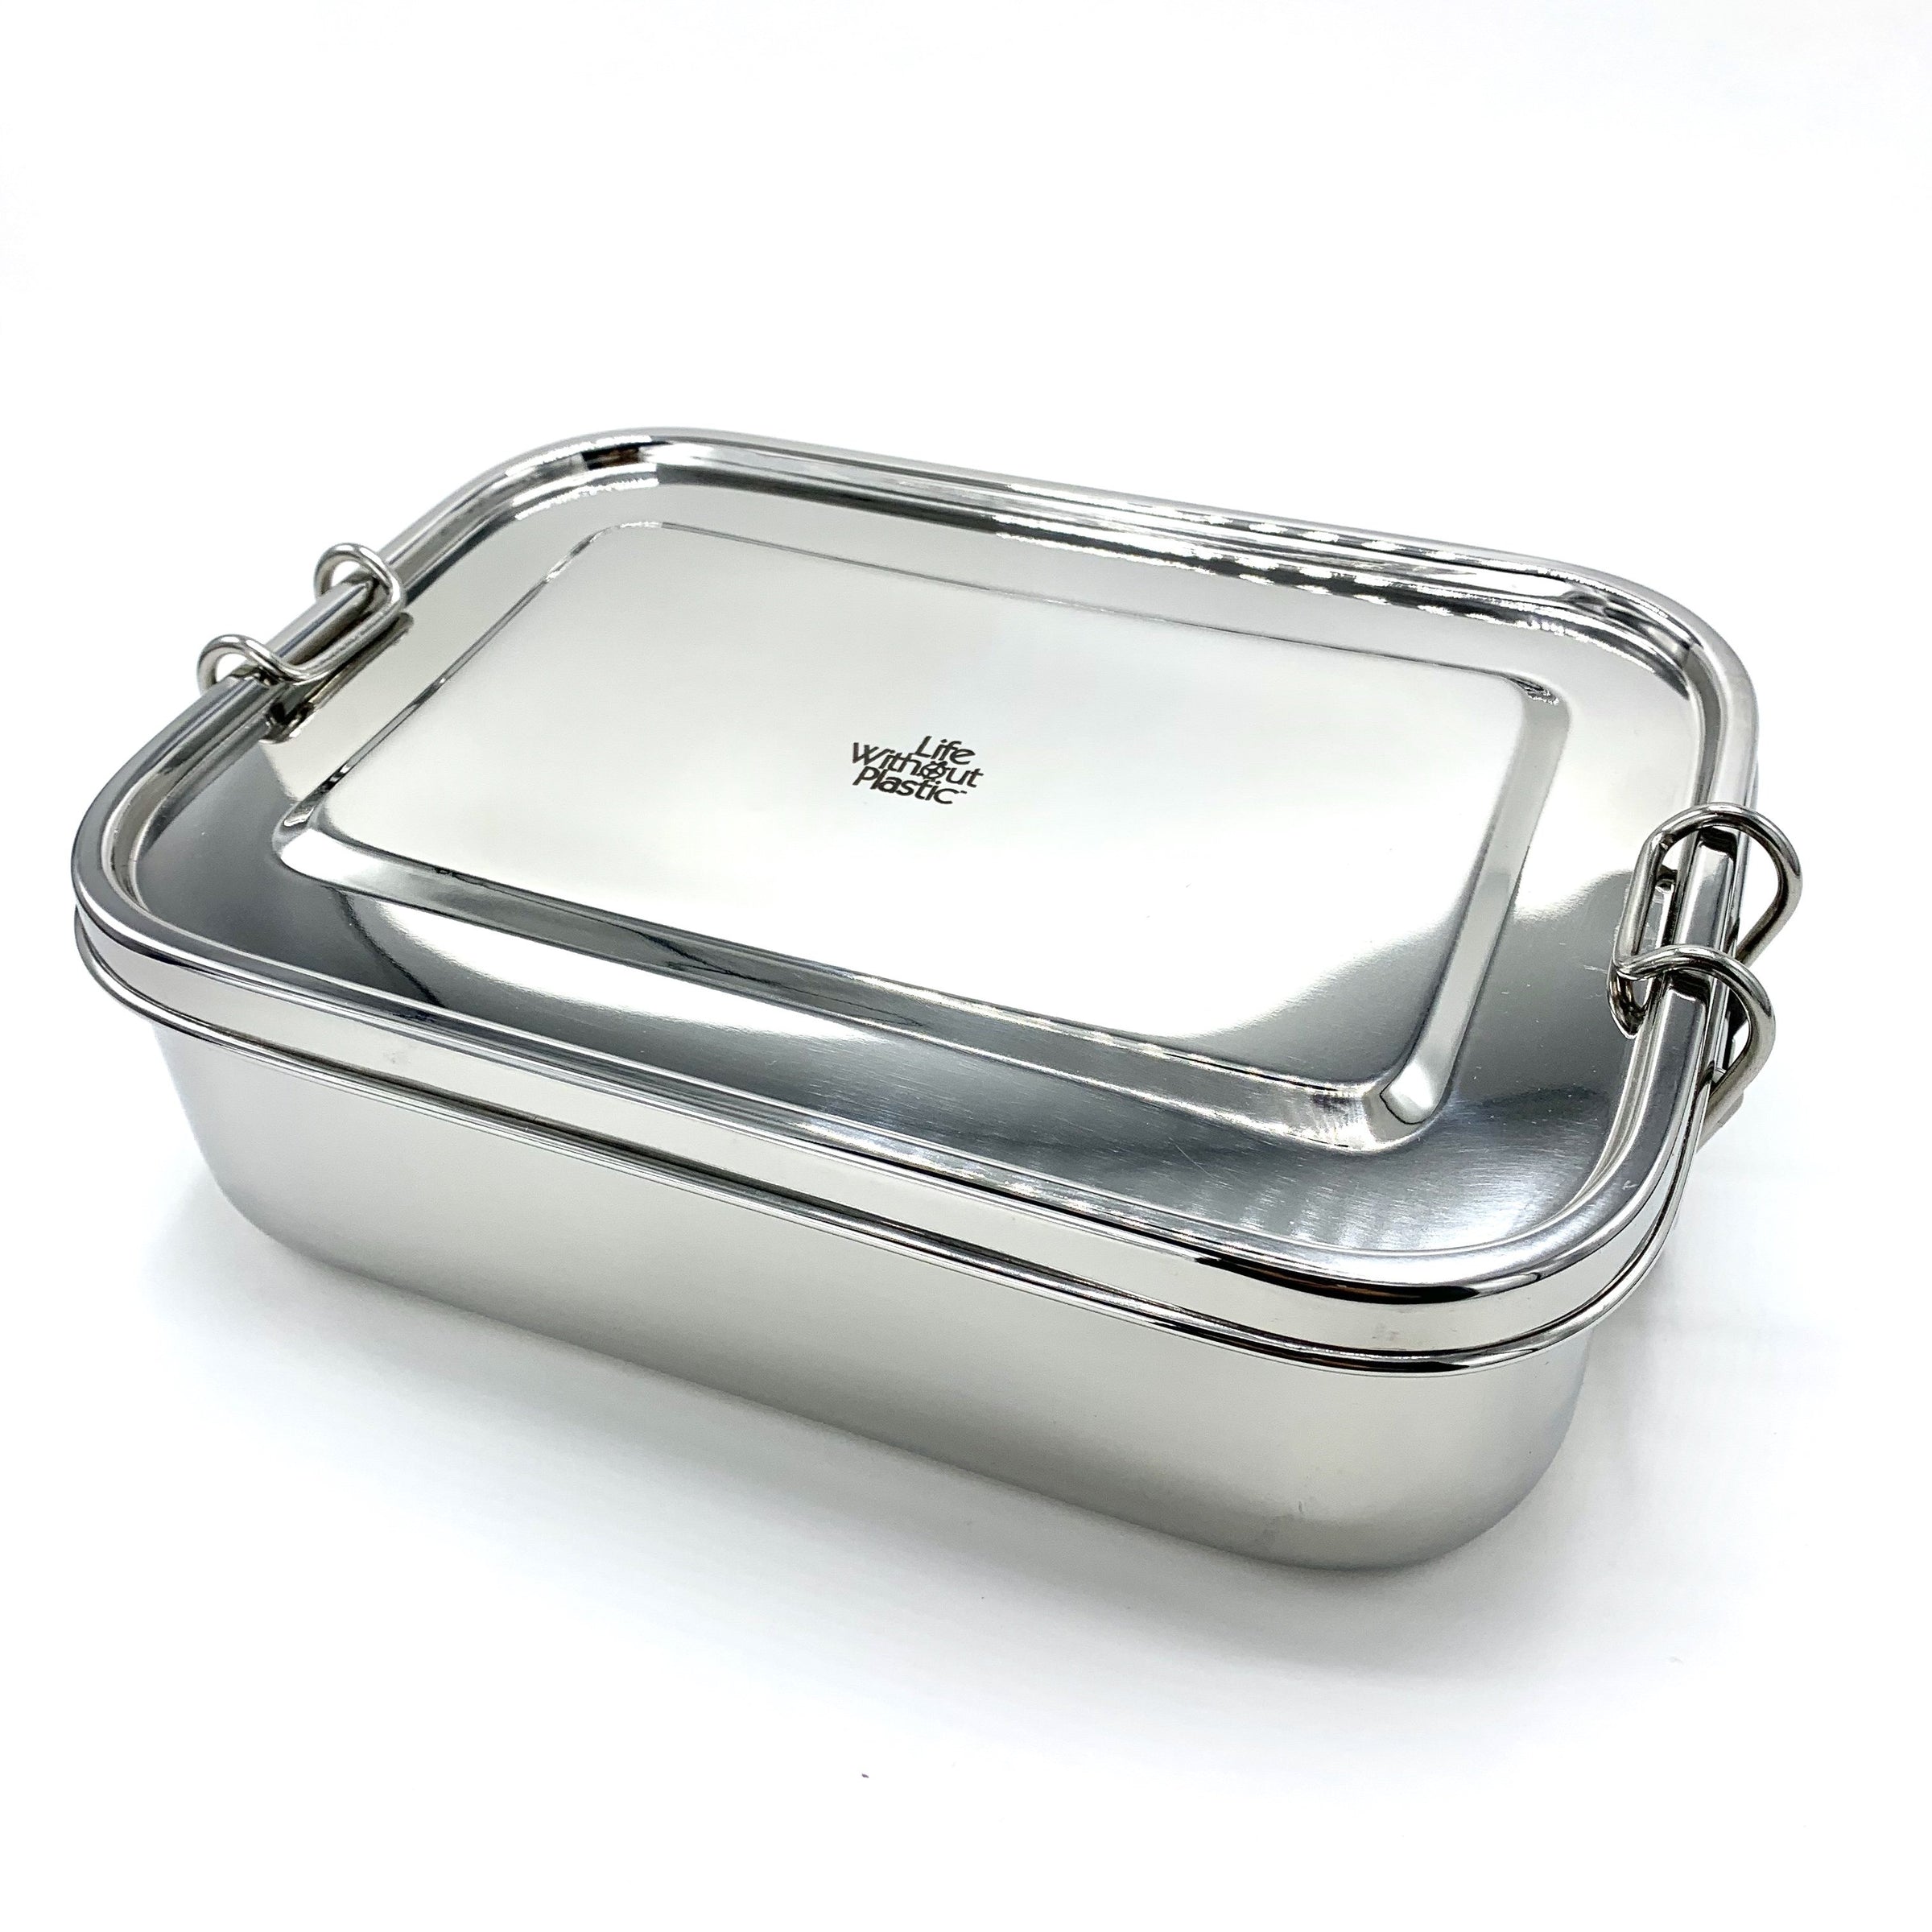 Stainless Steel Airtight Rectangular Storage Container - 4 L - for